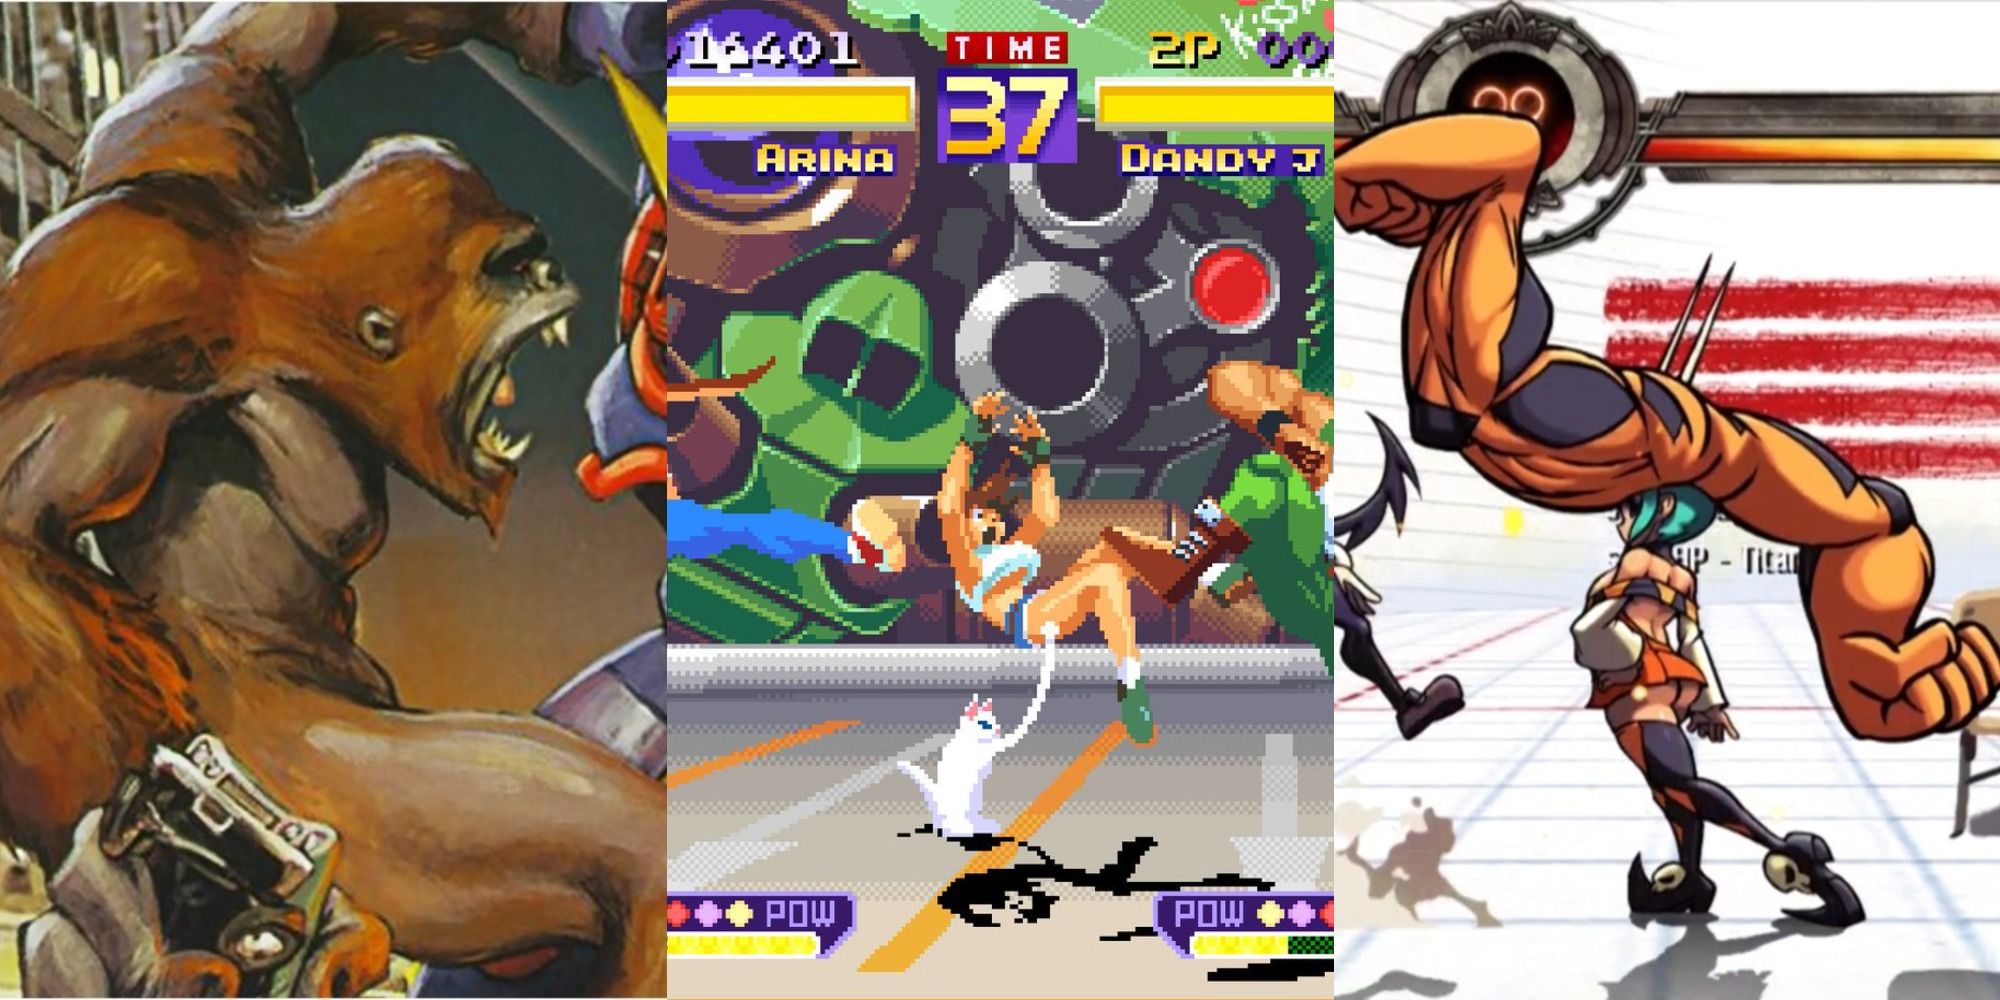 War of the Monsters giant gorilla holding a car battling a giant robot, Waku Waku 7 girl tripping in front of a giant robot, Skullgirls Cerebella flexing